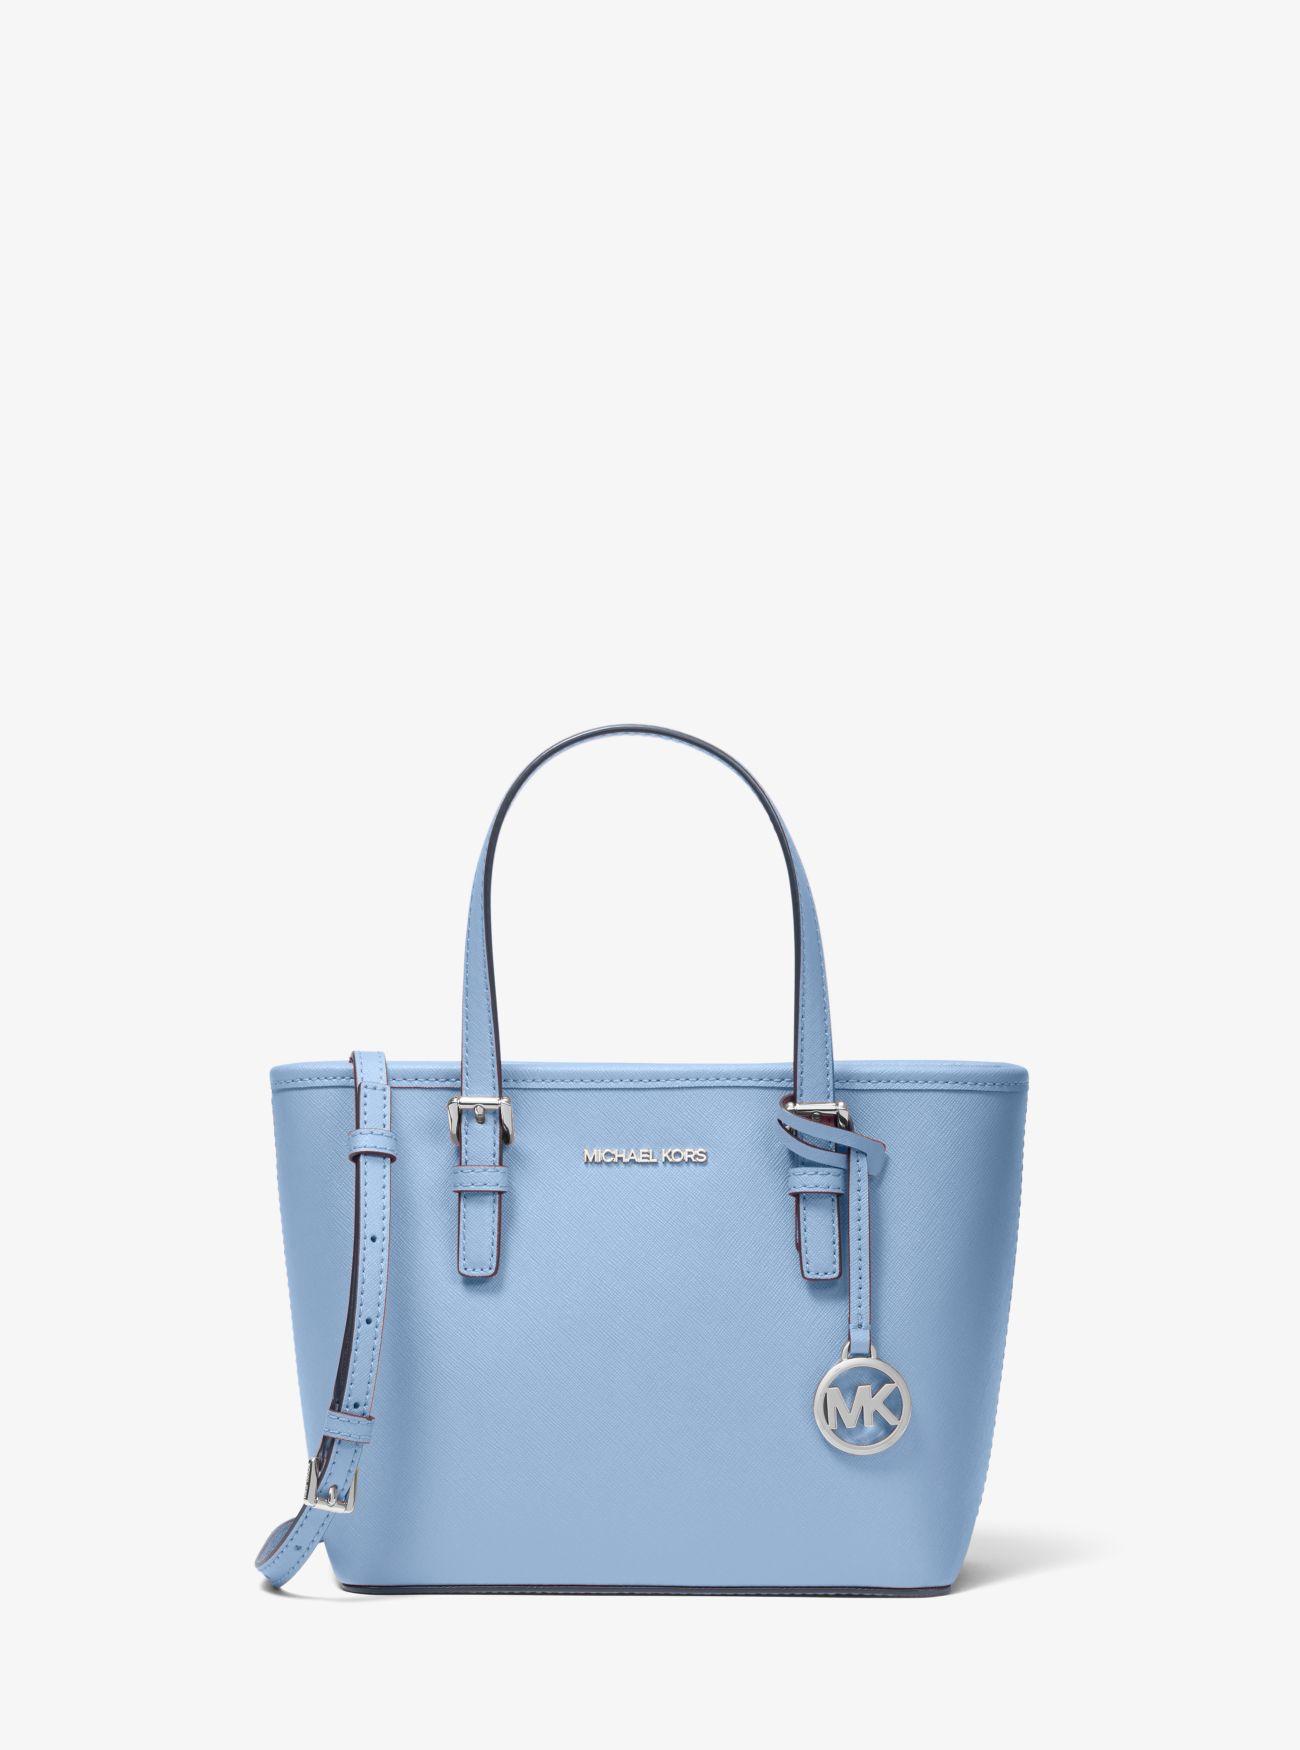 Michael Kors Jet Set Travel Extra-small Saffiano Leather Top-zip Tote Bag  in Blue